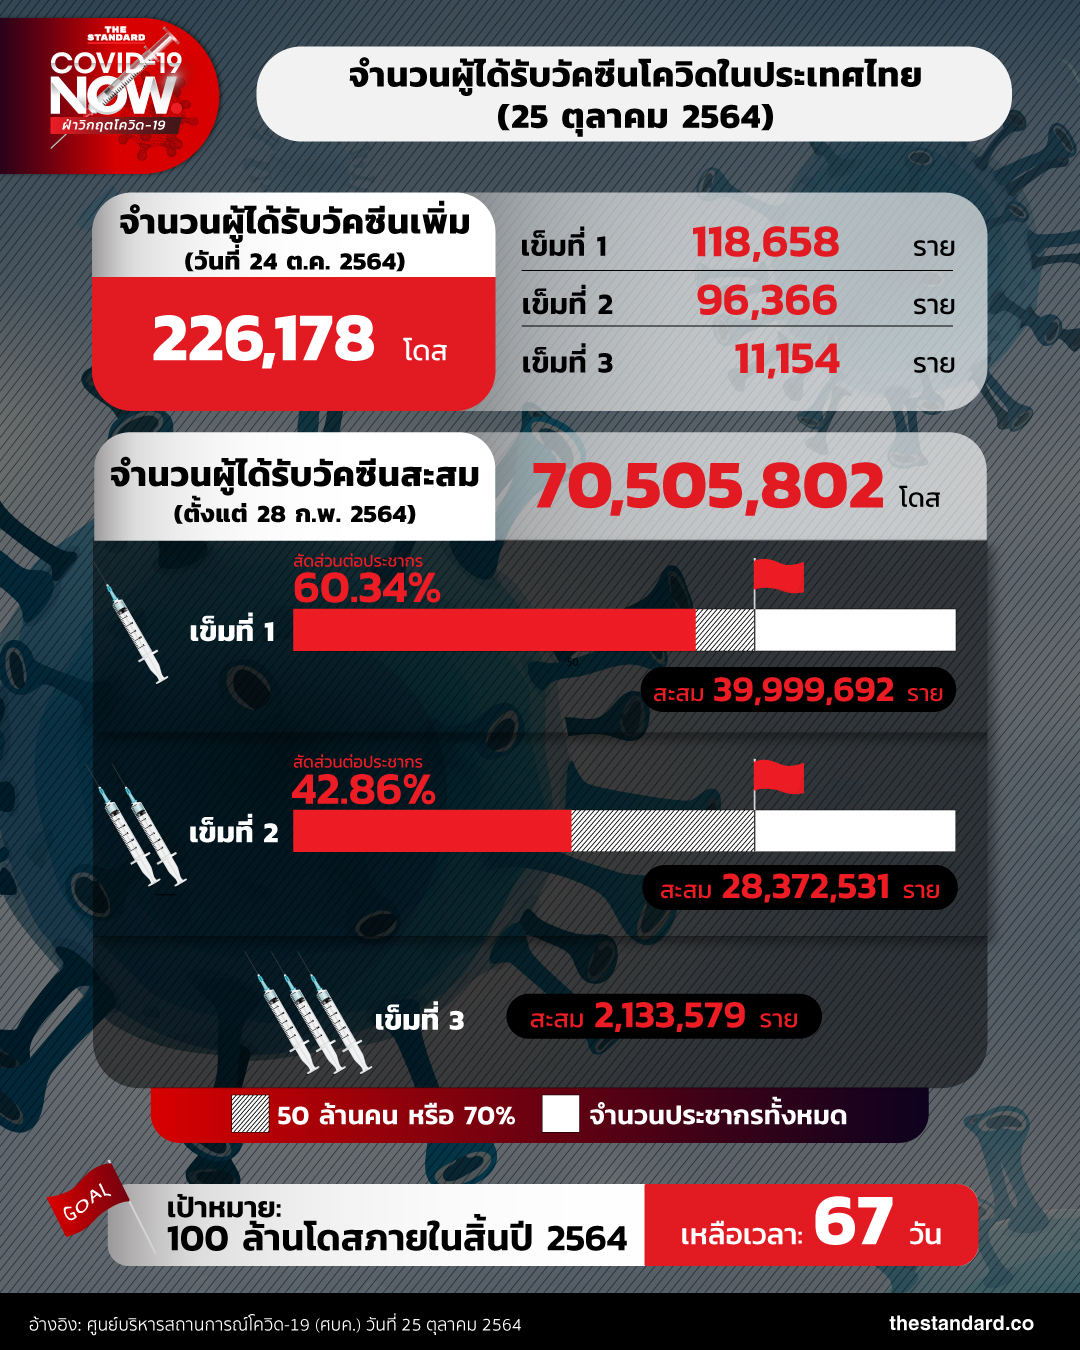 number-of-people-got-covid-19-vaccines-in-thailand-251064